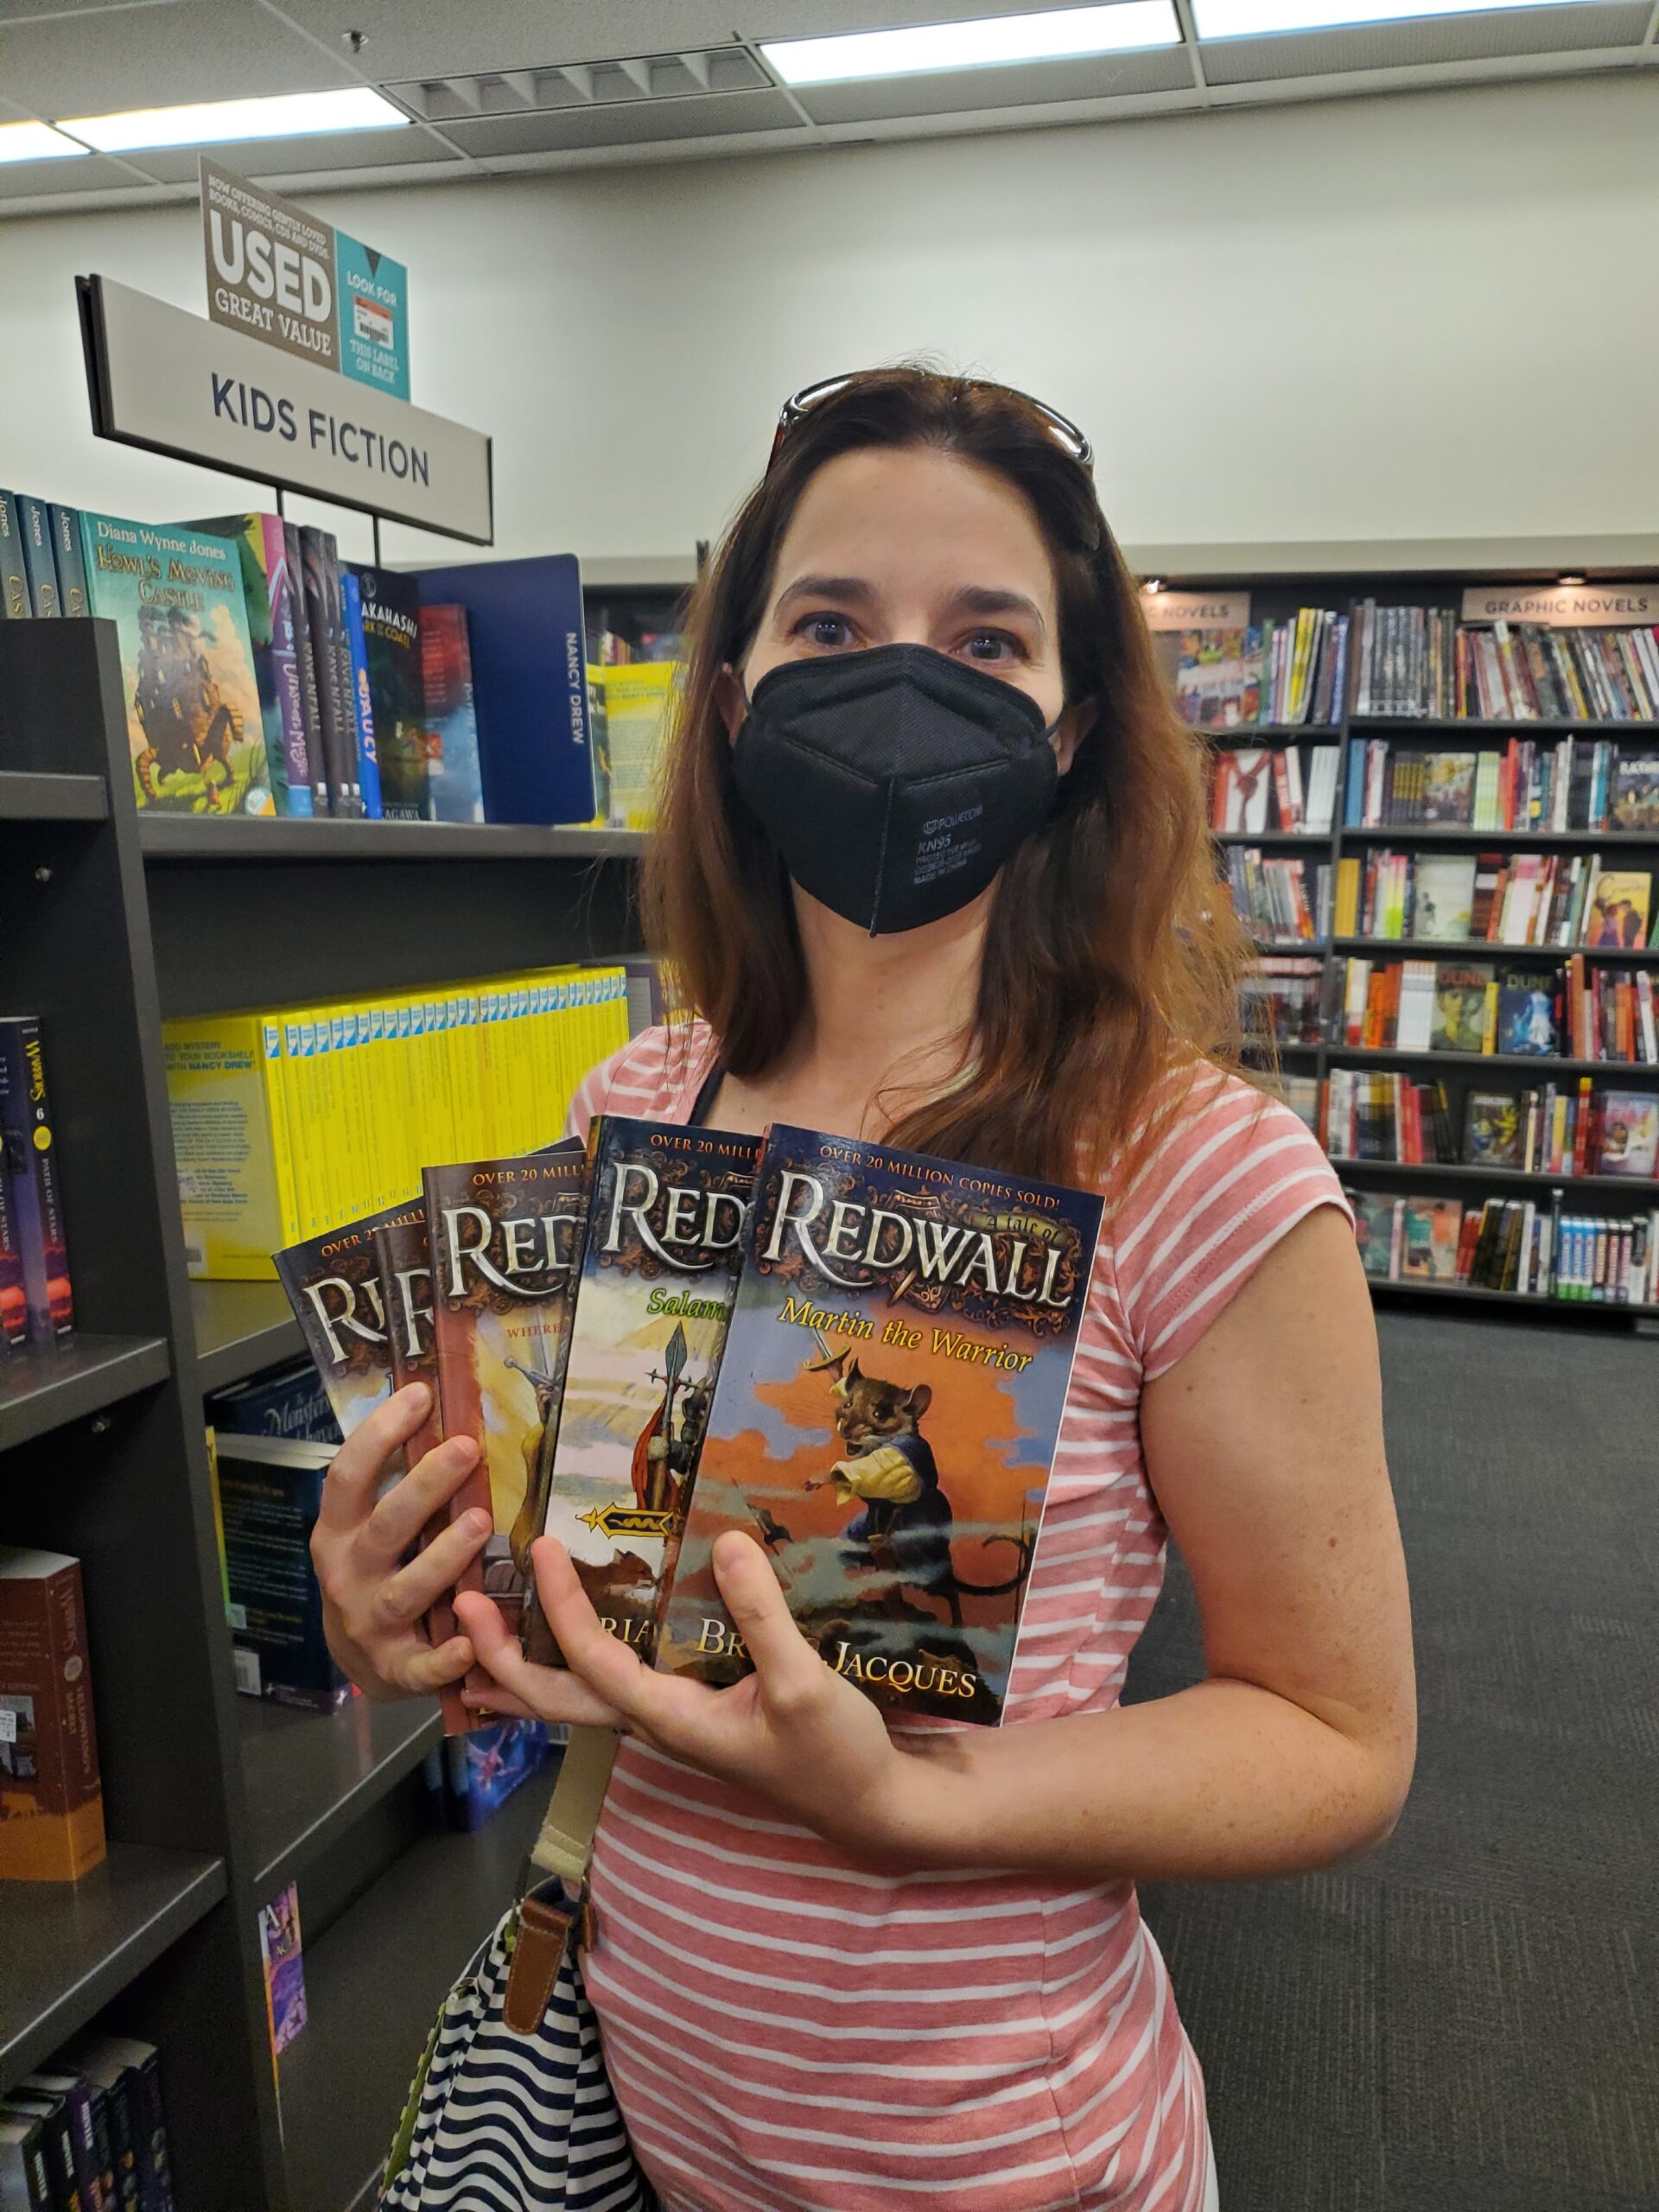 A young woman in a pink t-shirt is standing in a book shop. She has red-brown shoulder-length hair and is wearing a black medical mask. She is holding four fantasy books in her hands with the title "Redwall".